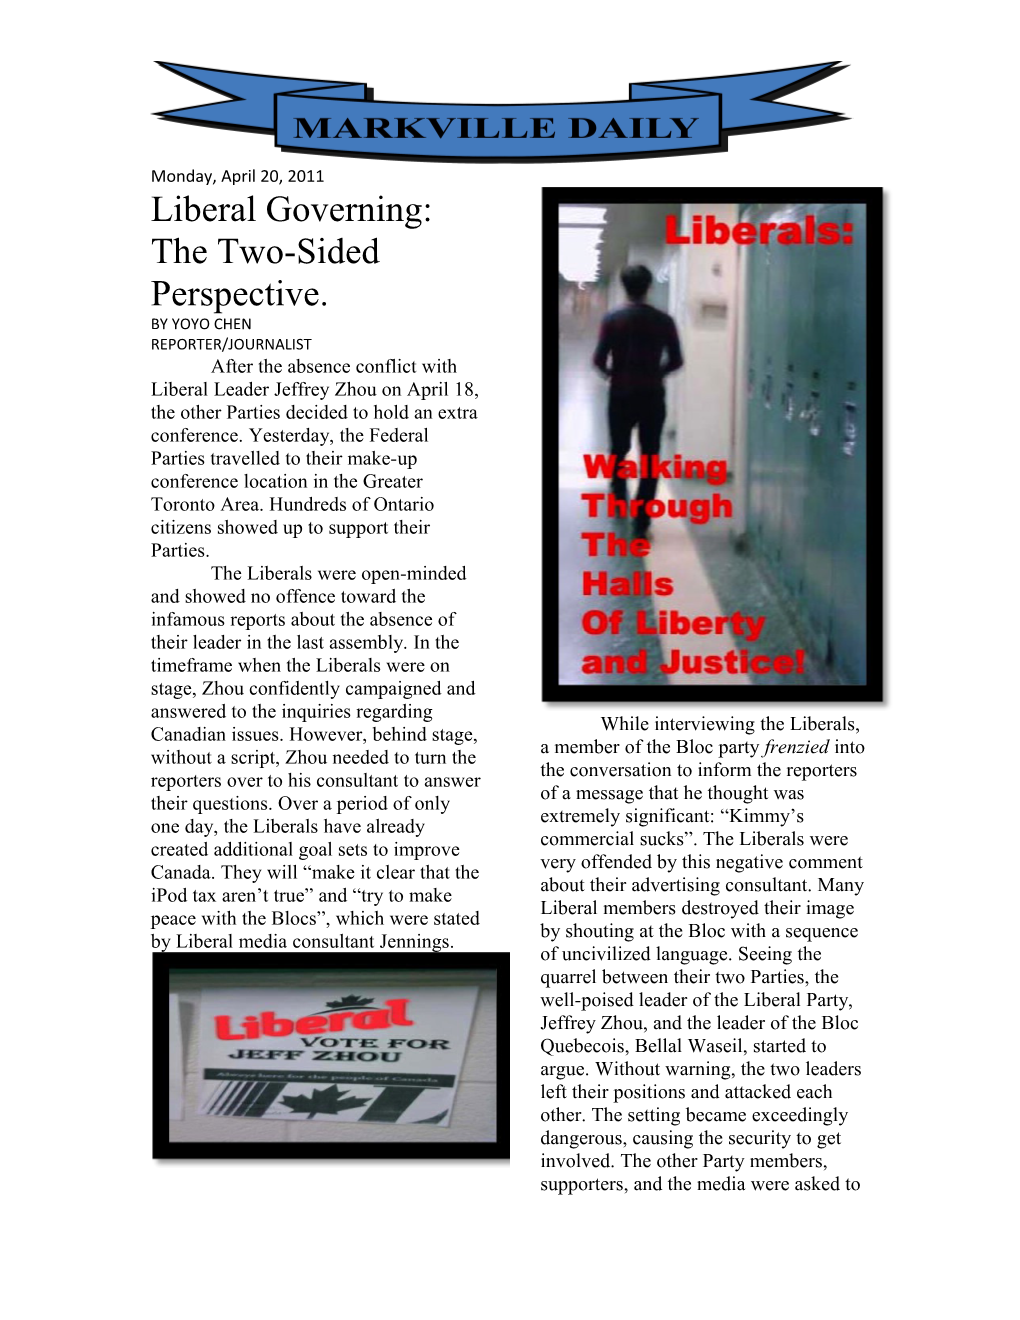 Liberal Governing: the Two-Sided Perspective